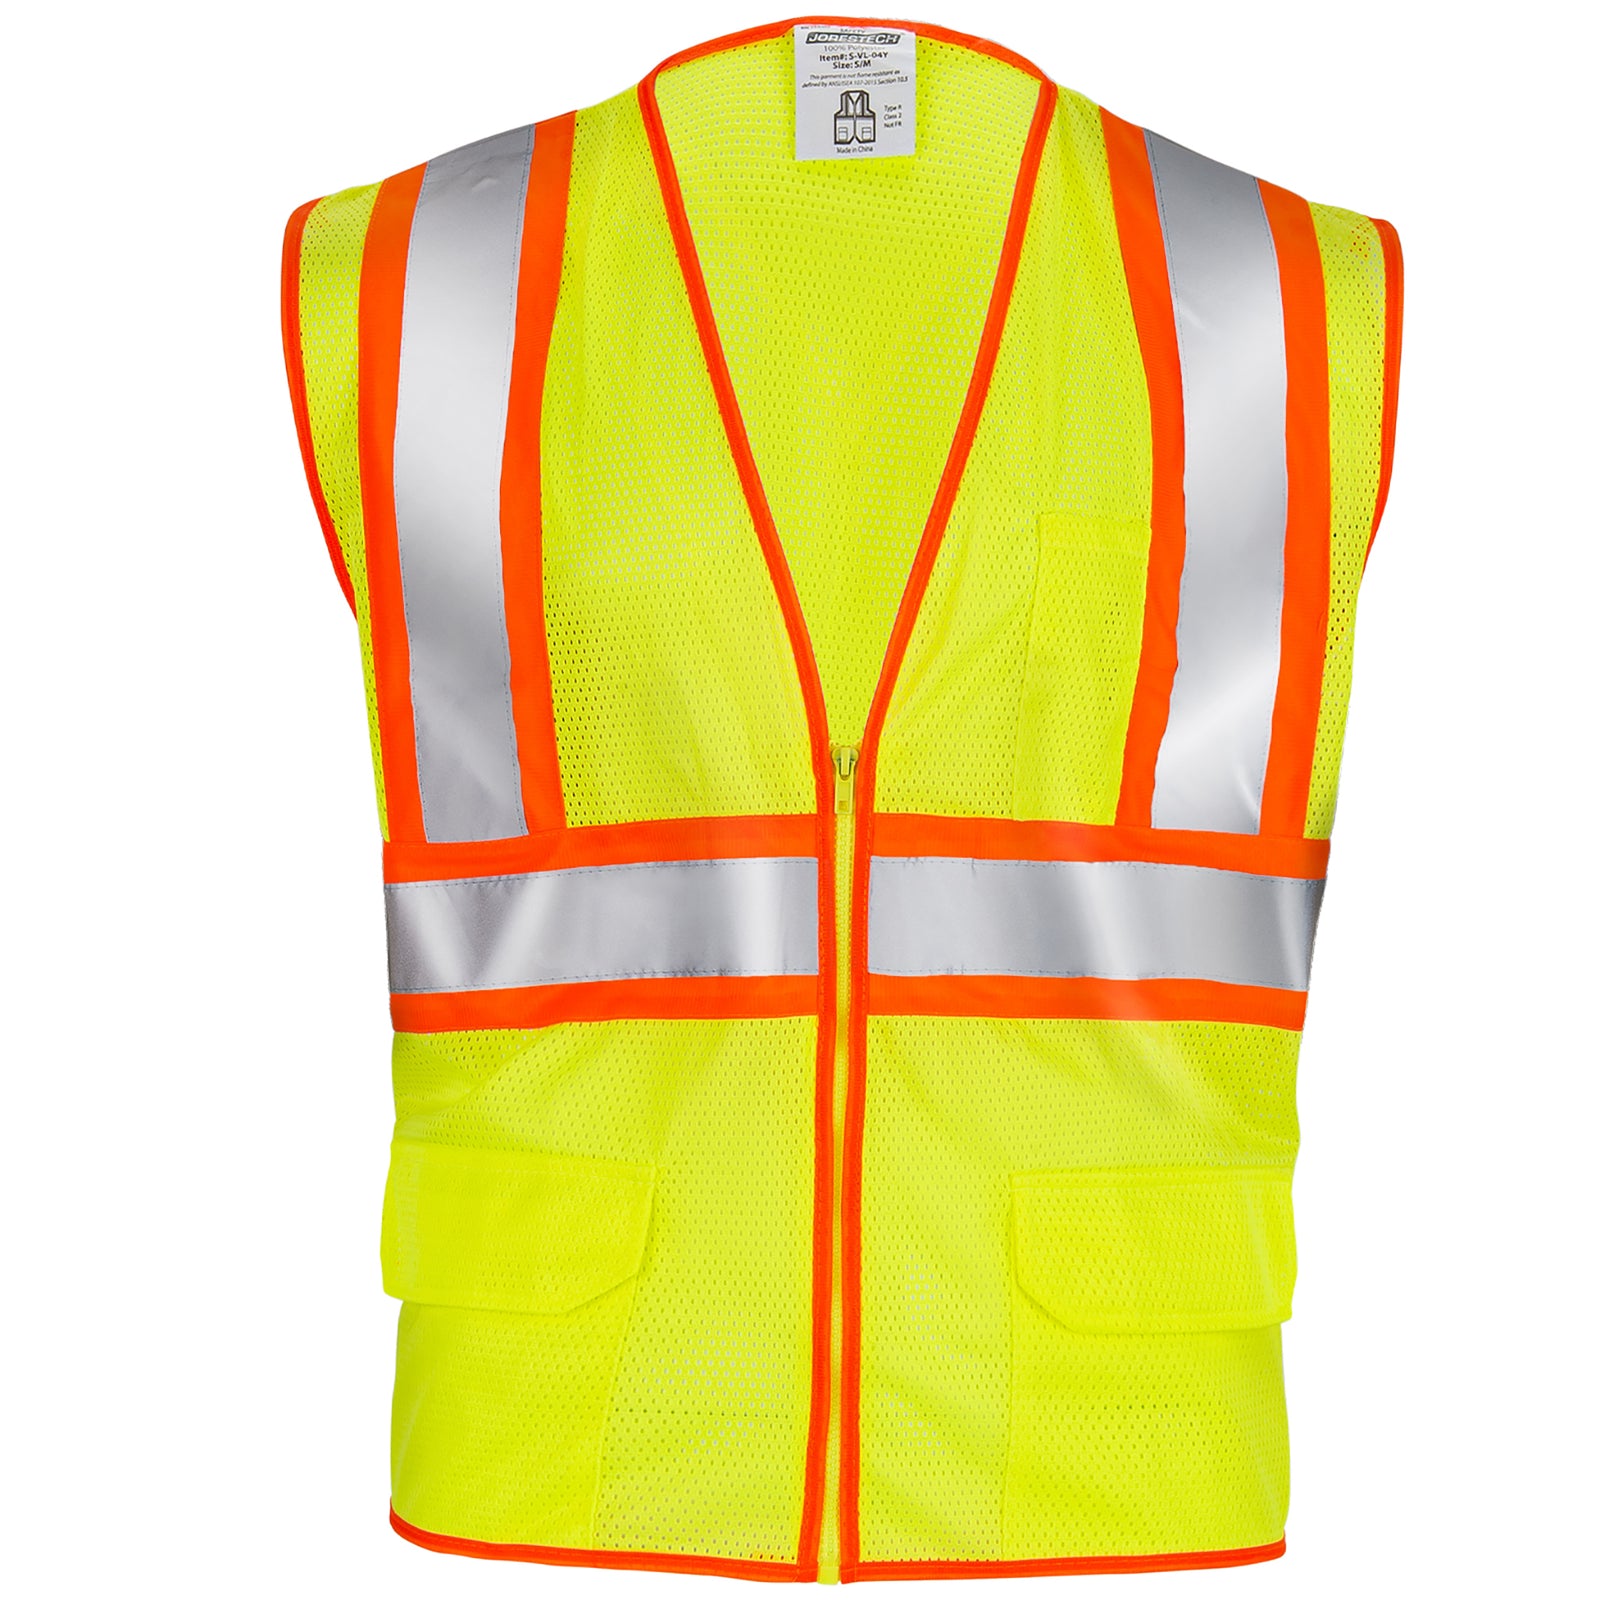 Front view of the JORESTECH printed hi-vis two tone mesh safety vest with 2 inches reflective strips over white background